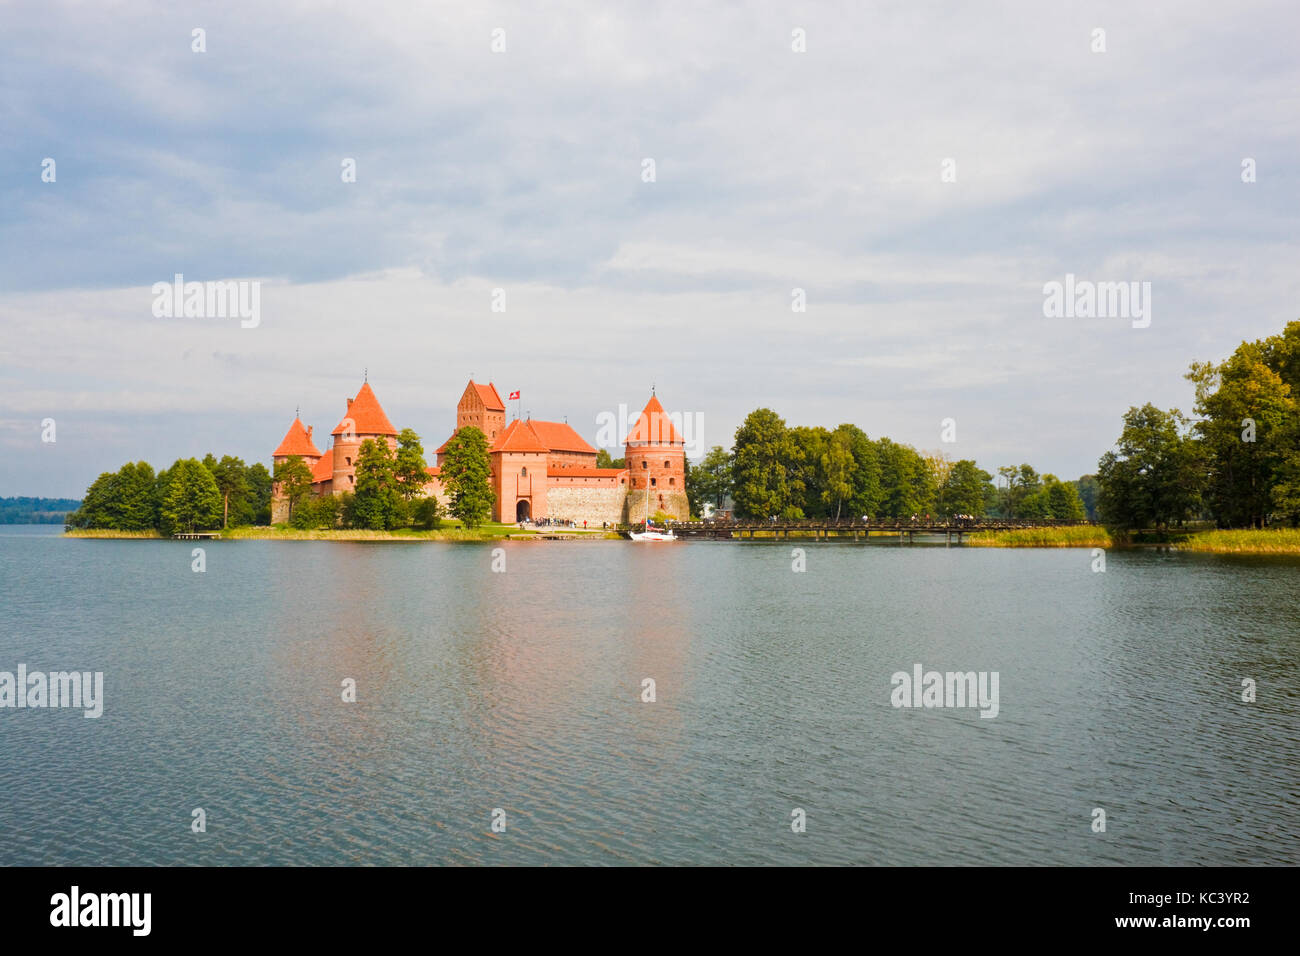 Trakai Island castle -  one of the most popular touristic destinations in Lithuania. Stock Photo